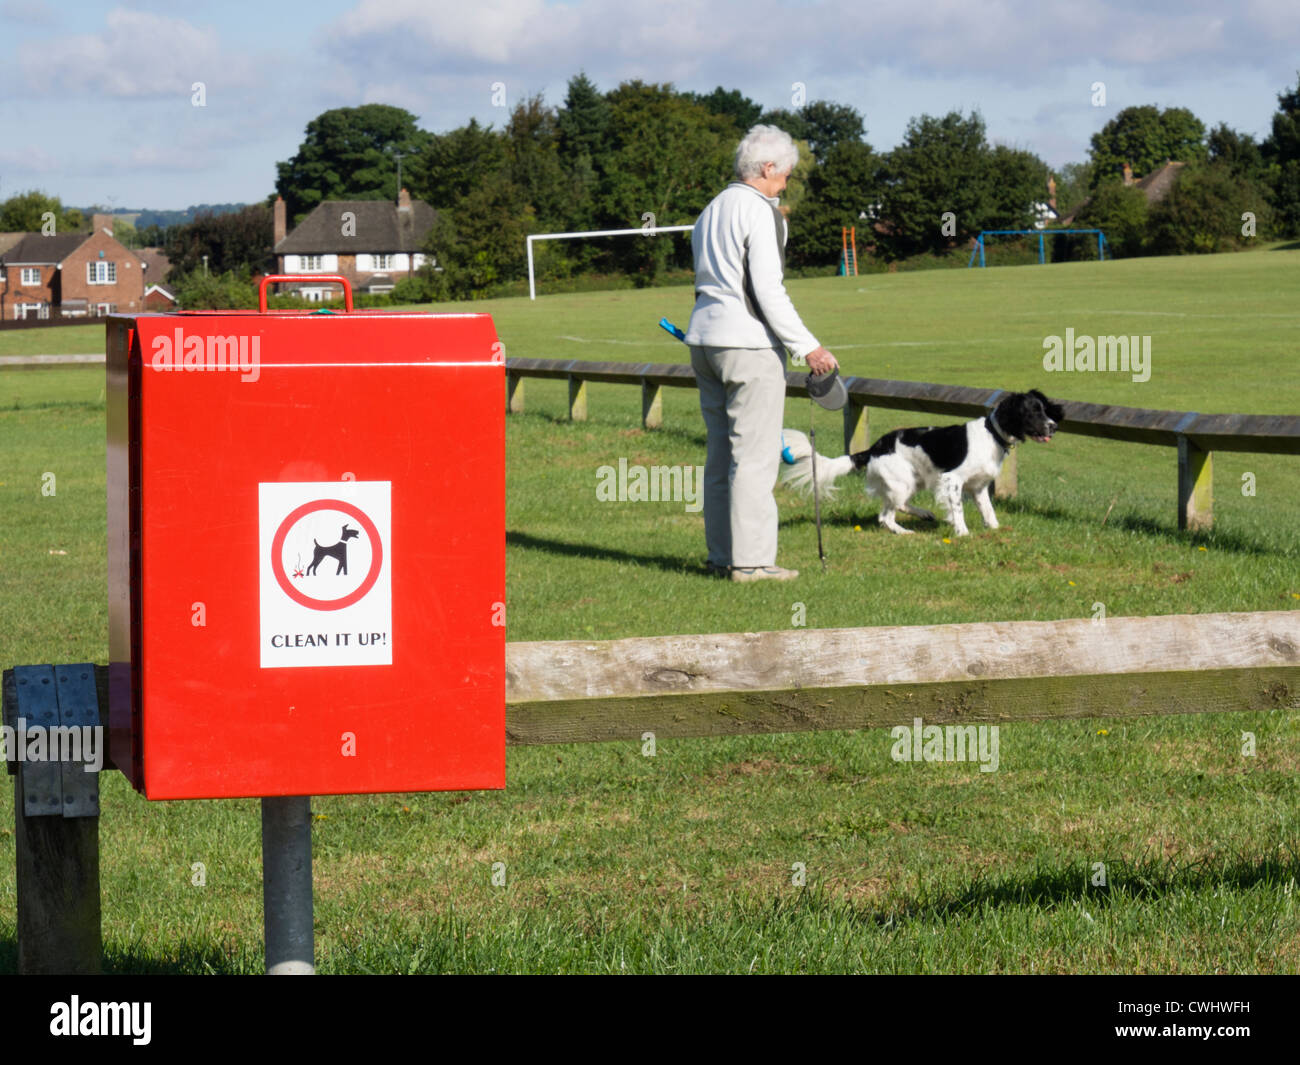 Dog waste bin by playing fields in an urban park public space with a woman walking a dog on daily walk in background. England UK Britain Stock Photo